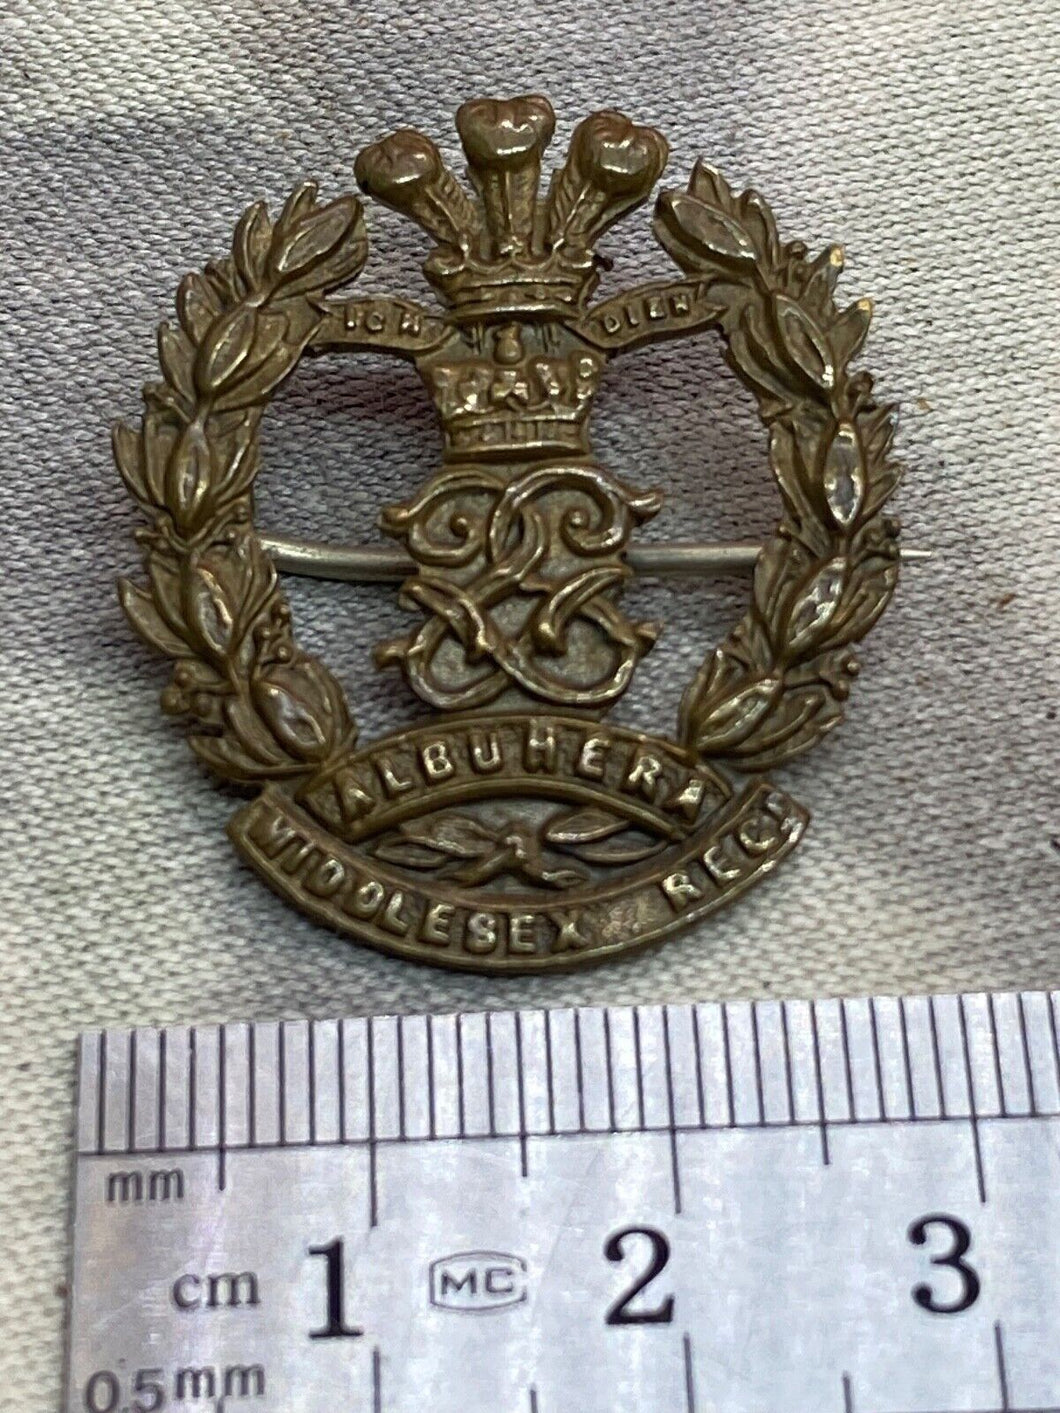 British Army - Middlesex Regiment Sweetheart Brooch